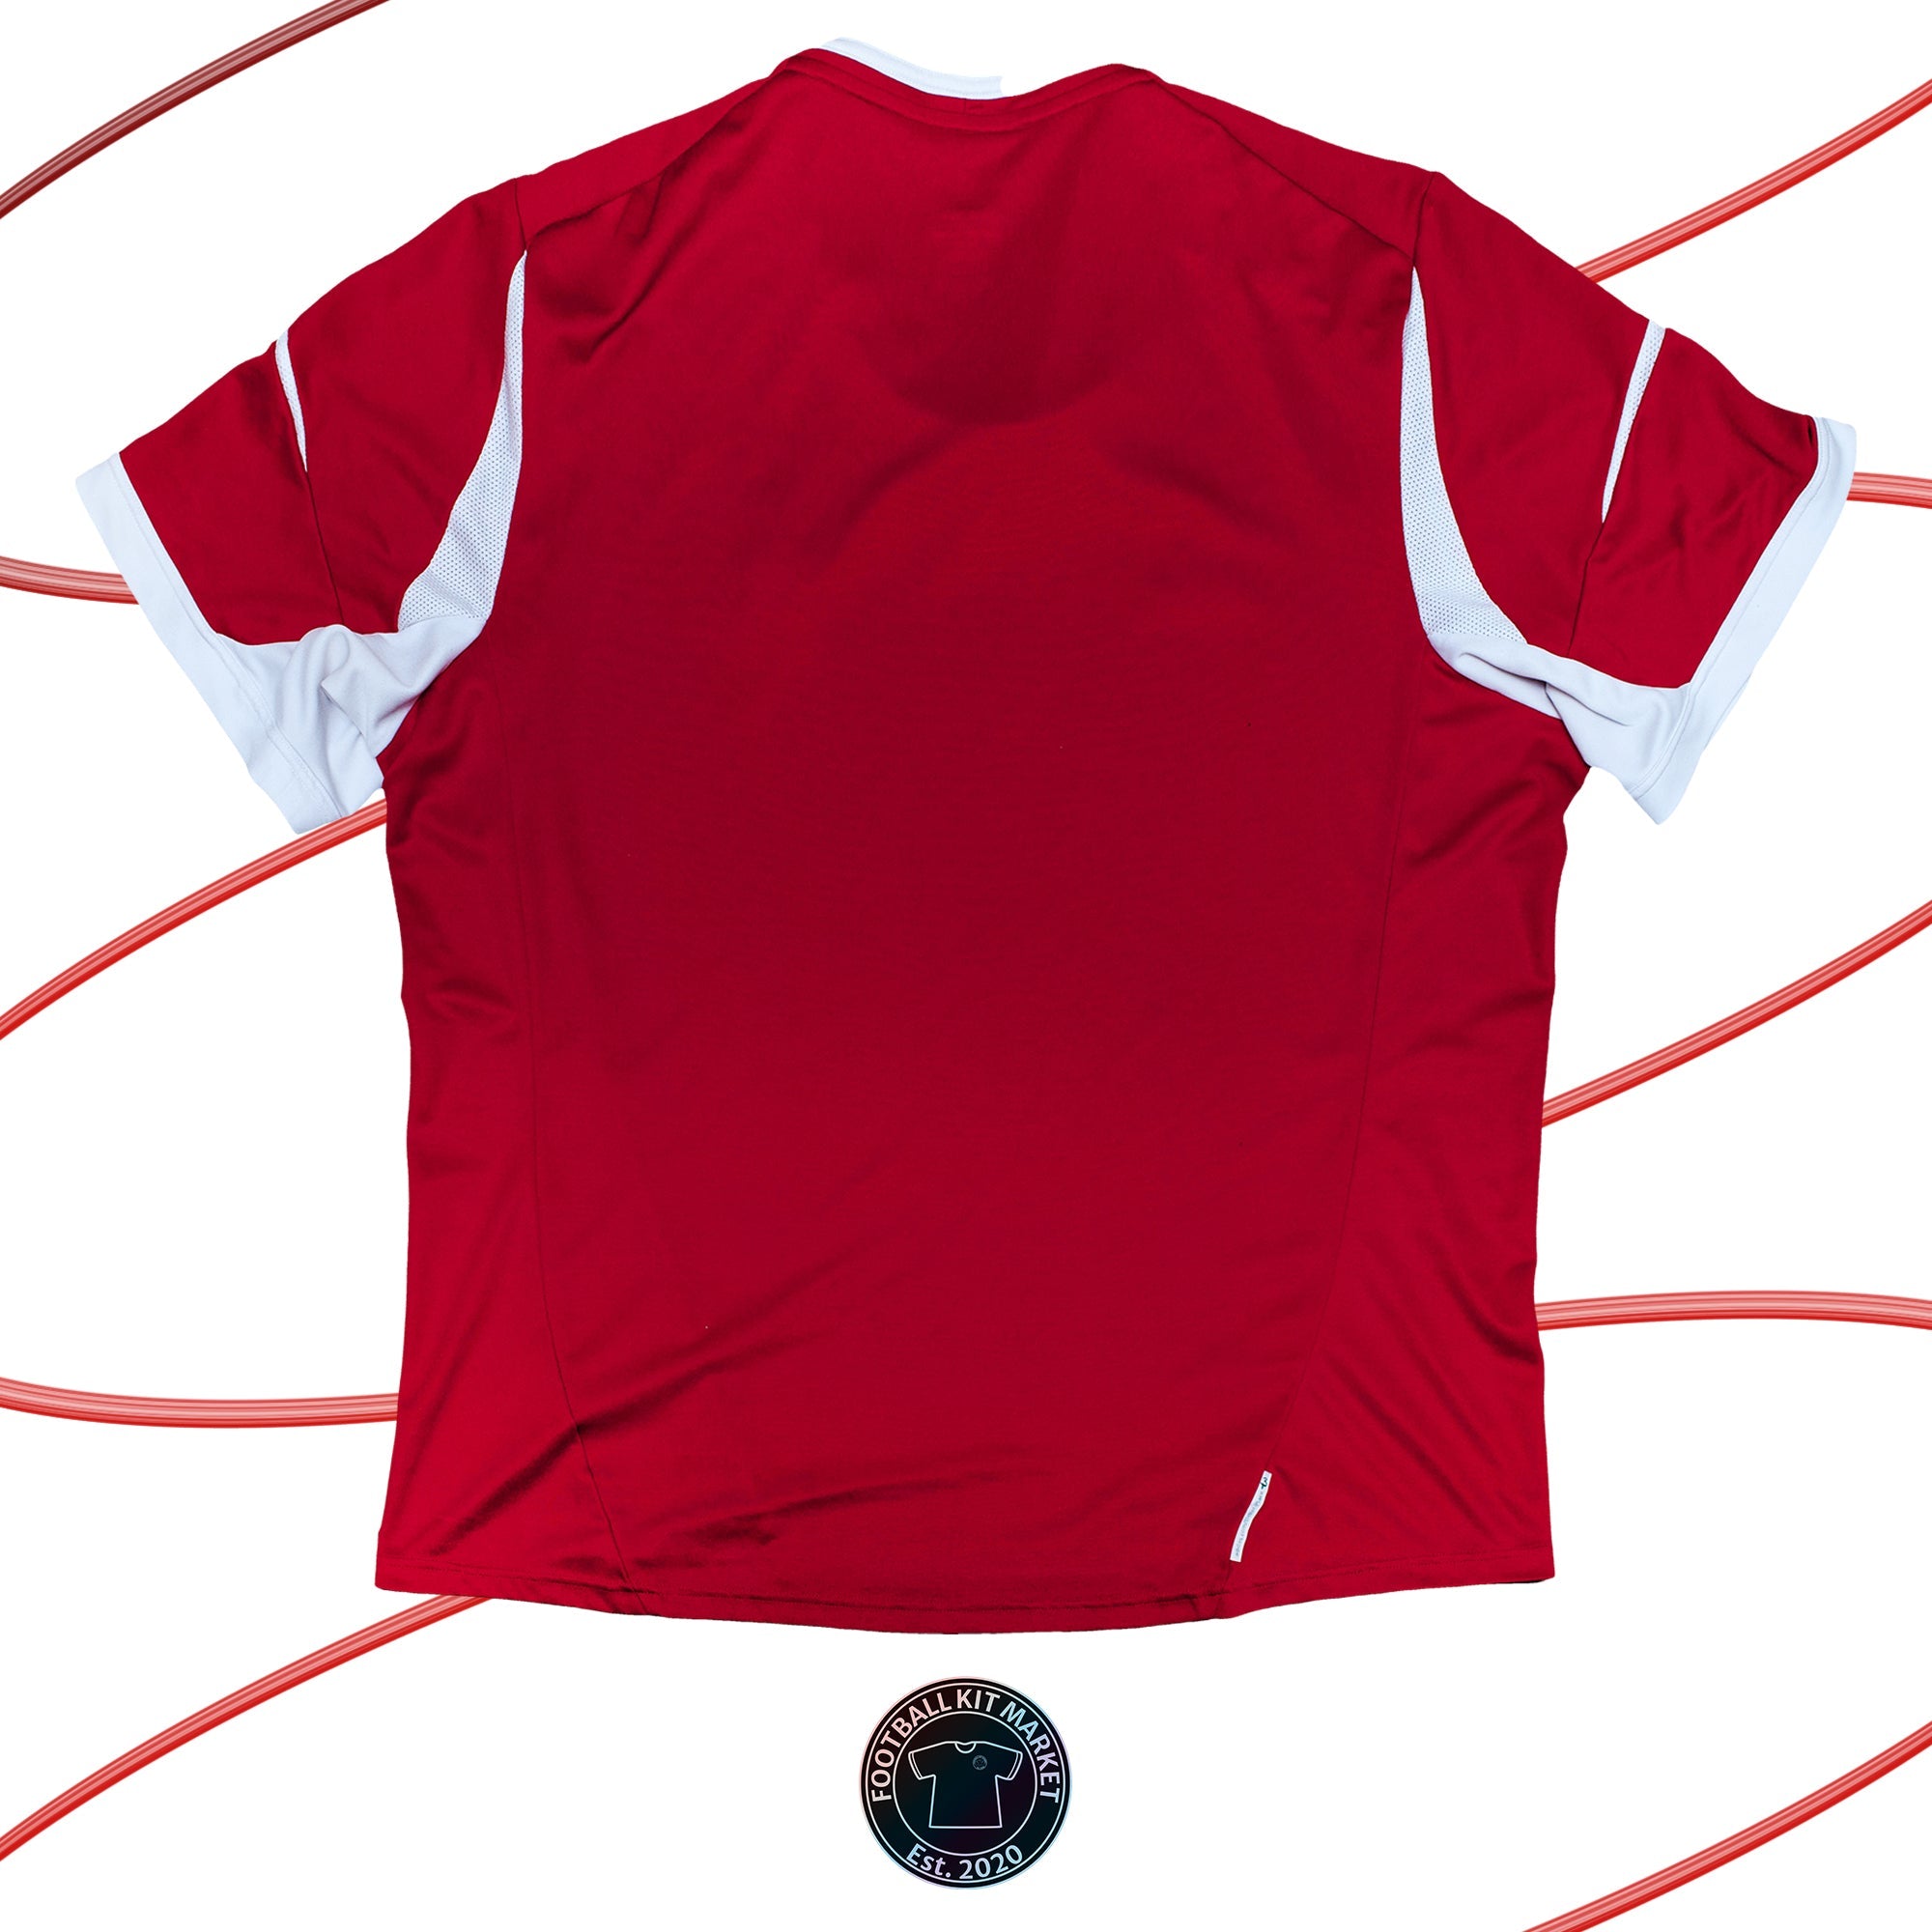 Genuine NOTTINGHAM FOREST Home (2013-2014) - ADIDAS (3XL) - Product Image from Football Kit Market